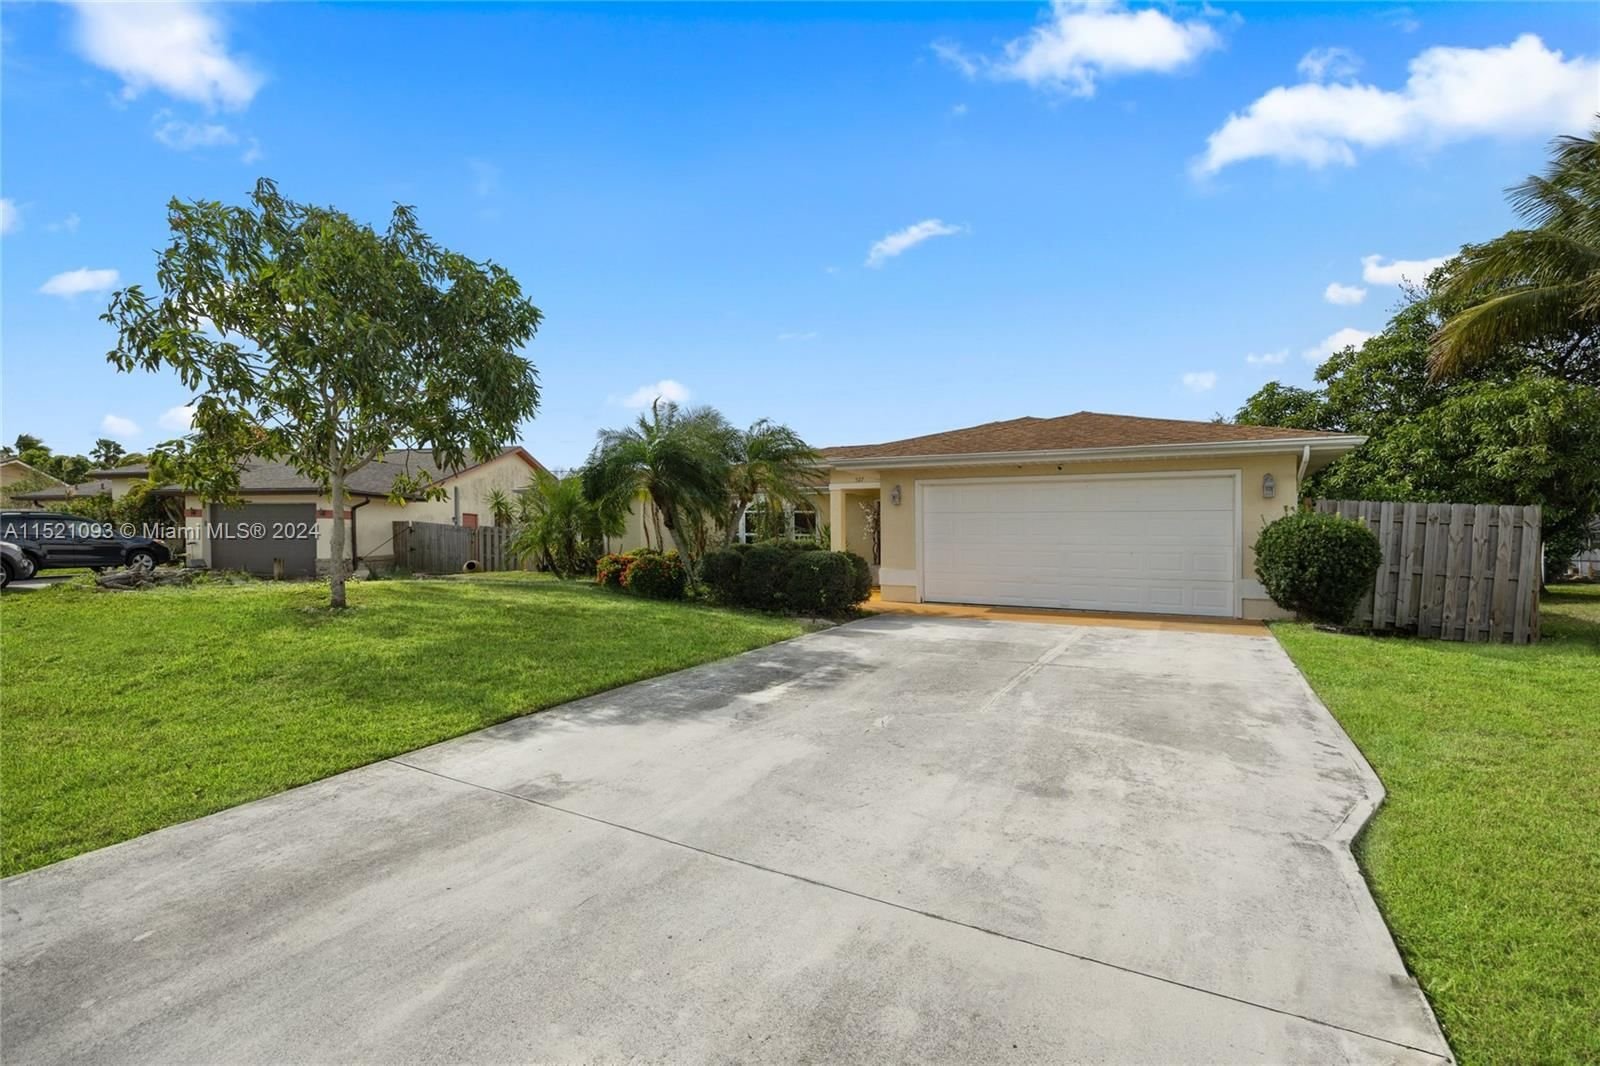 Real estate property located at 527 Cliff Rd, St Lucie County, PORT ST LUCIE SECTION 39, Port St. Lucie, FL